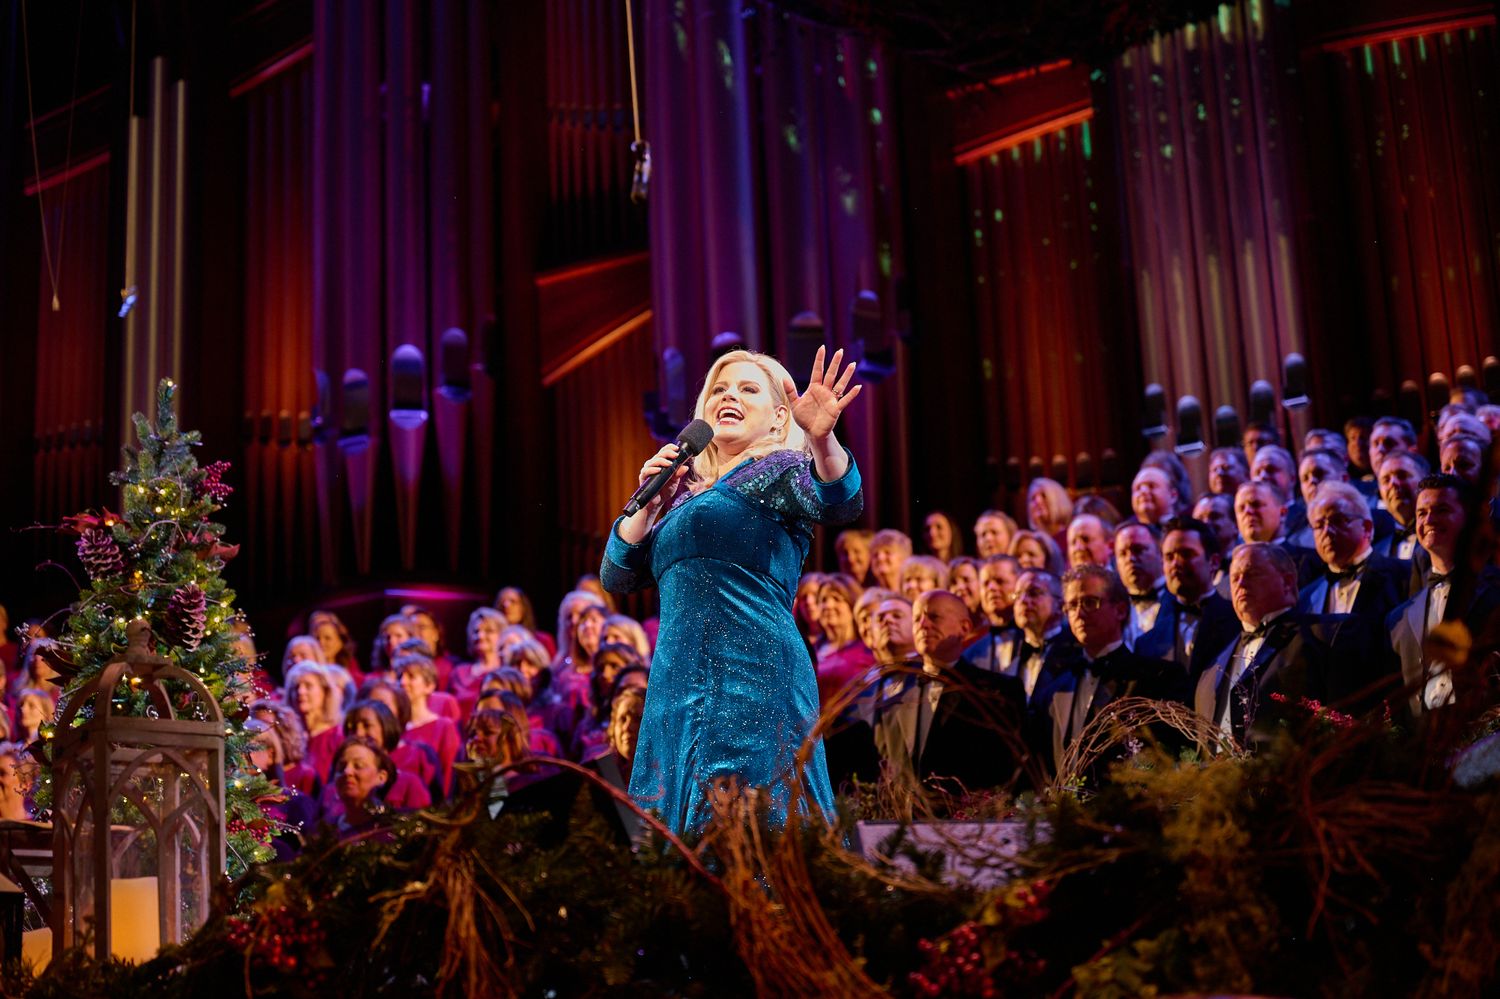 How To Get Tickets For The Mormon Tabernacle Choir Christmas Concert